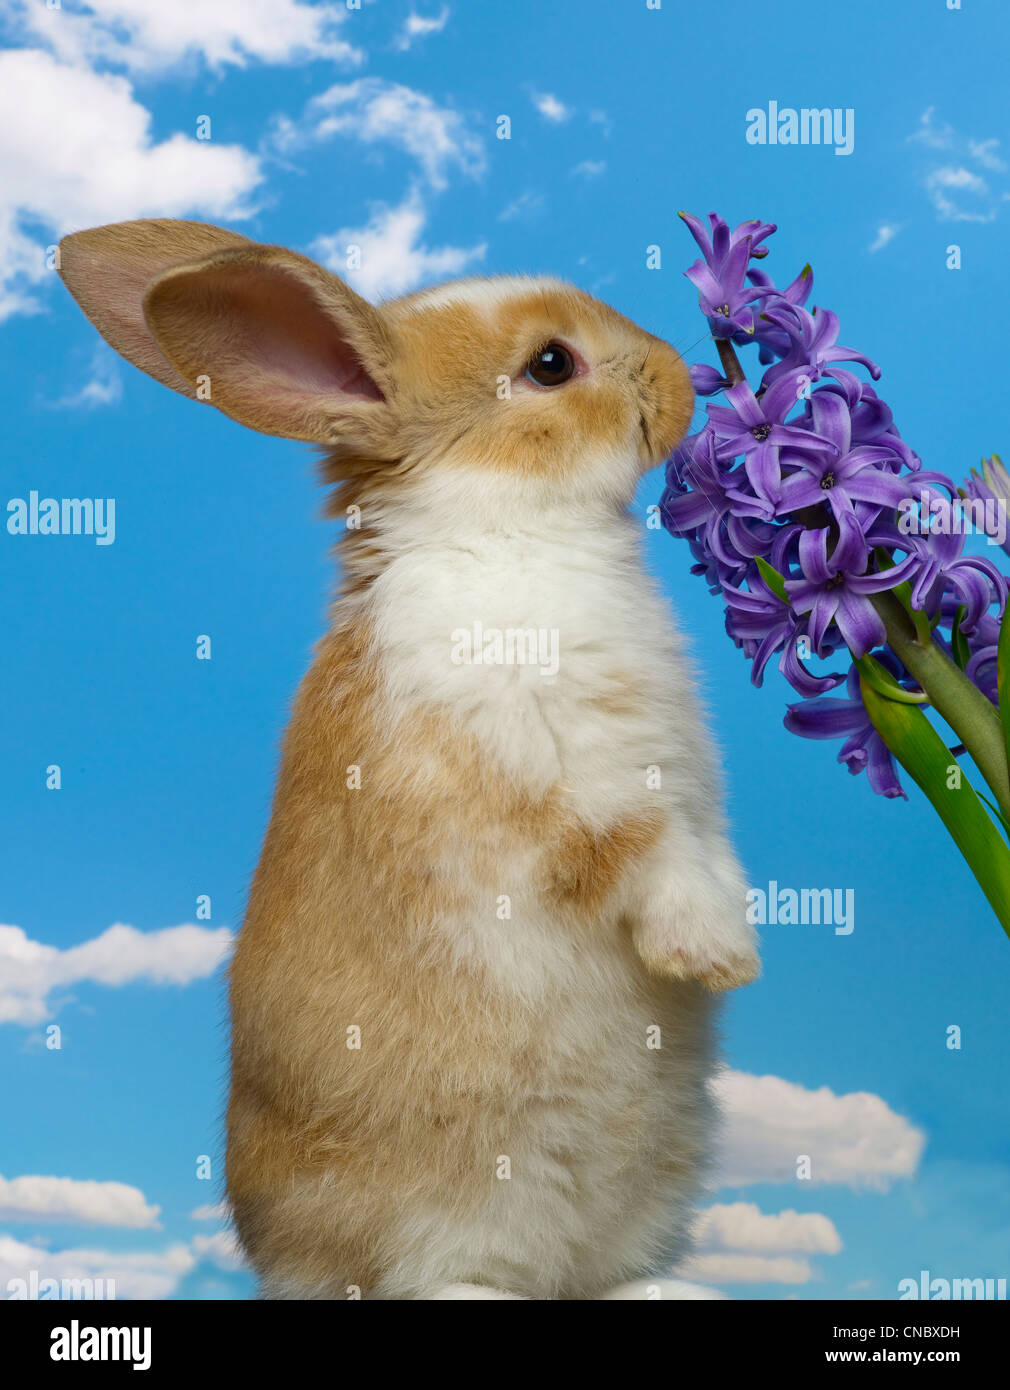 Bunny standing, eating flowers Stock Photo